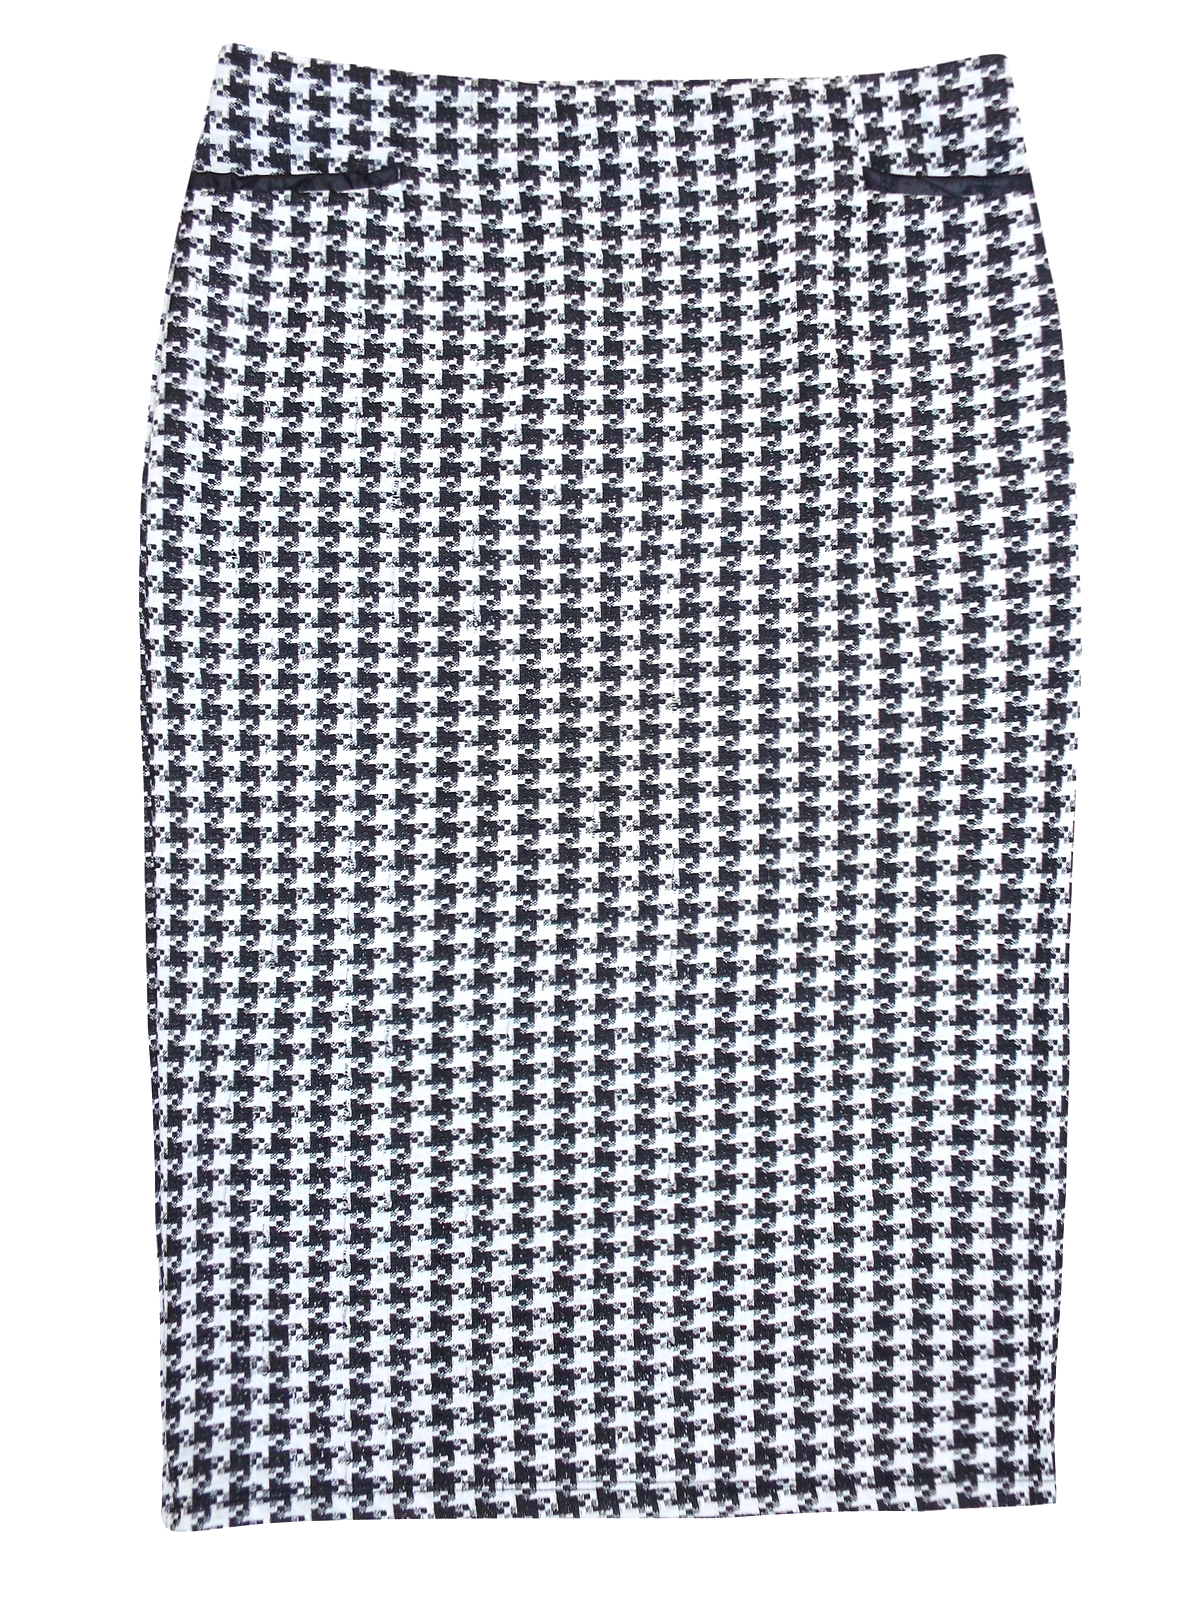 First Avenue BLACK Pull On Houndstooth Skirt - Size 14 to 16